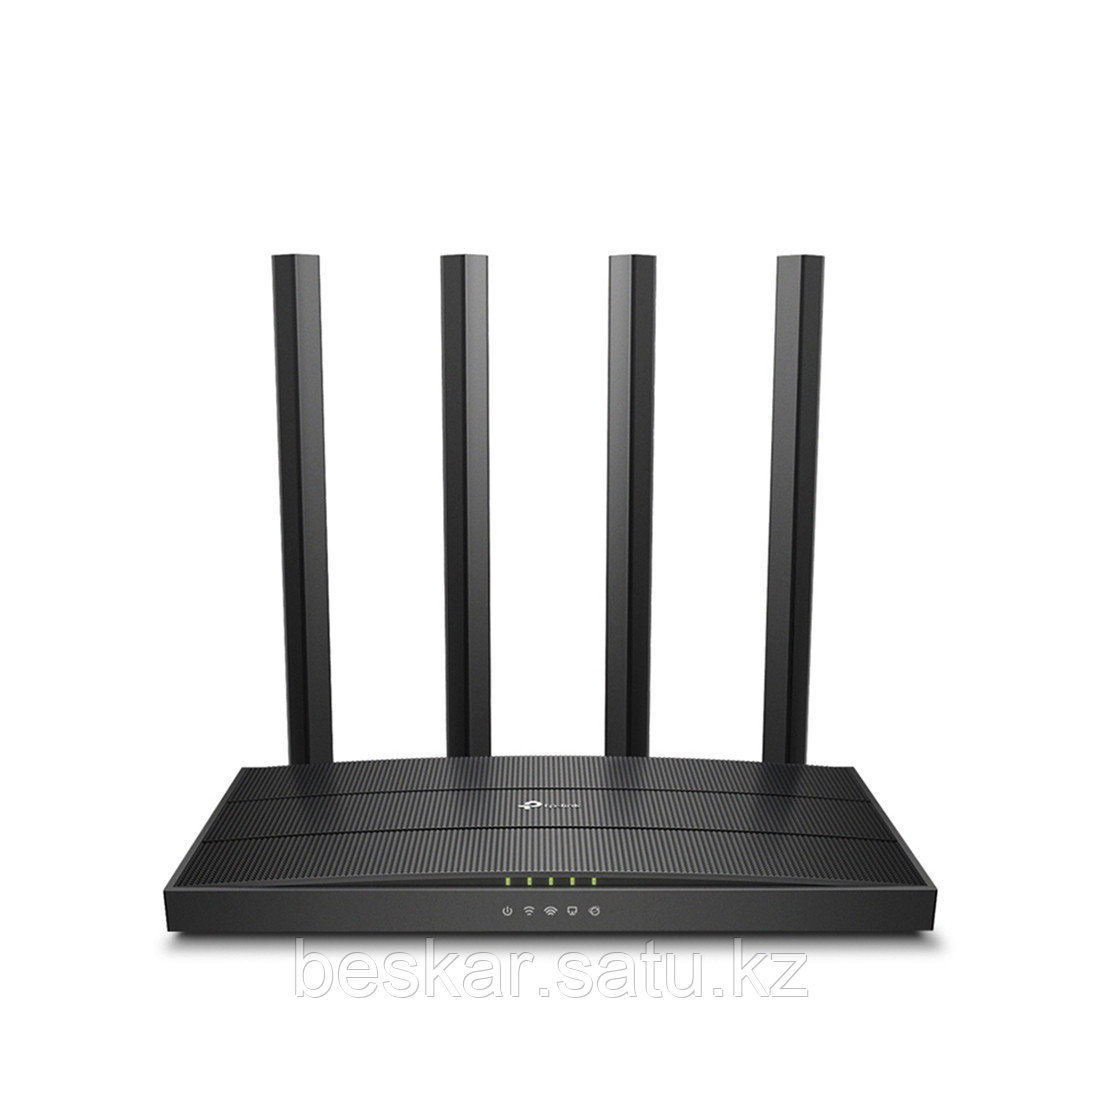 Маршрутизатор TP-Link Archer A6 - фото 1 - id-p108240982